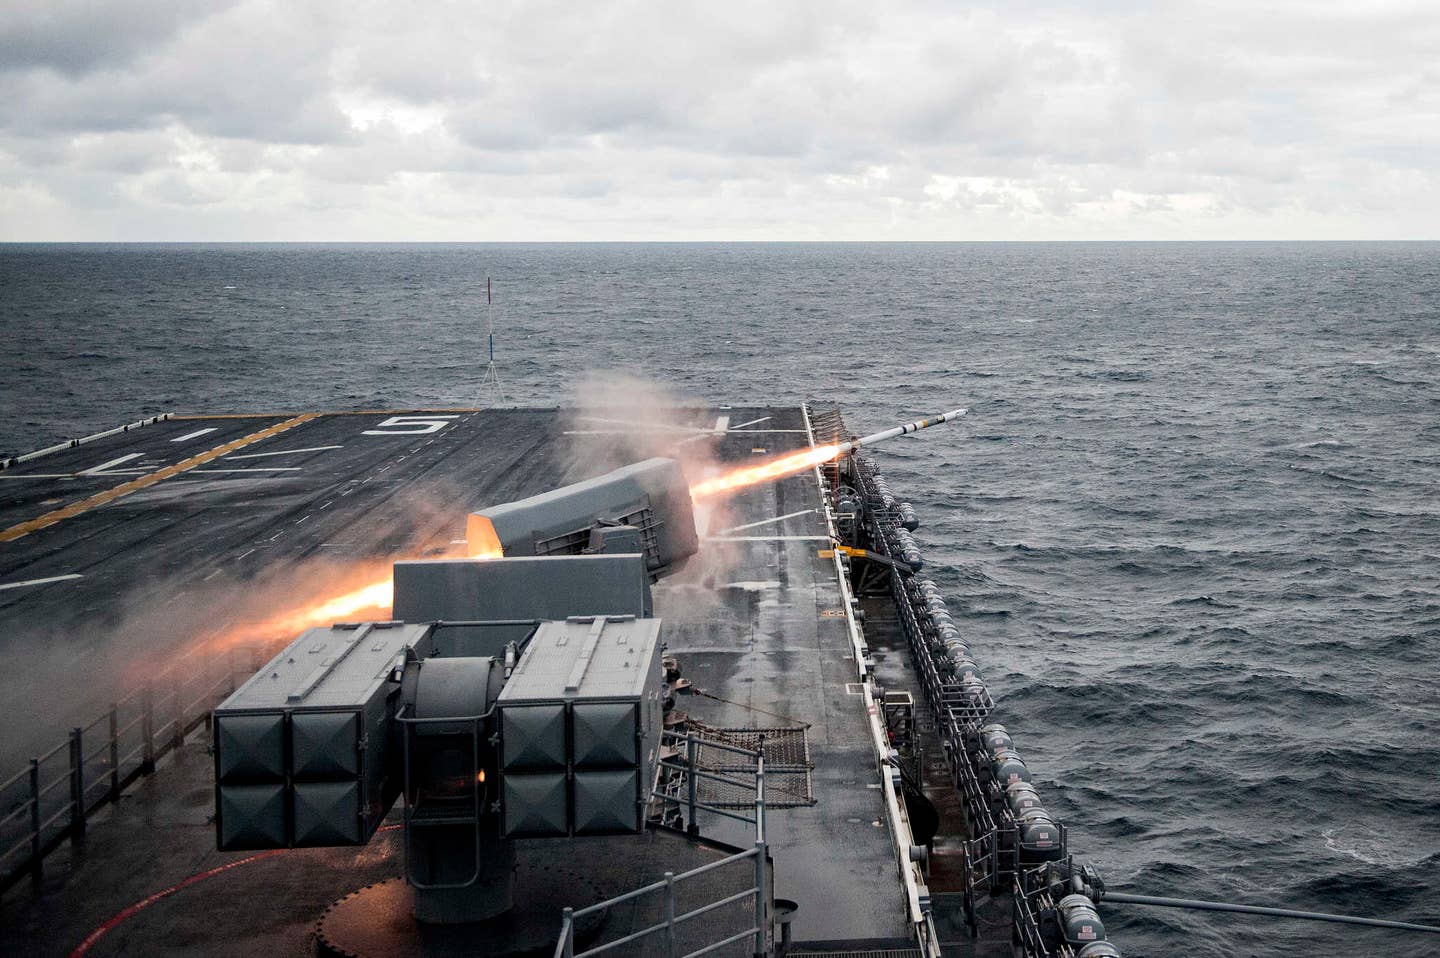 The amphibious assault ship USS Bataan (LHD 5) conducts a live-fire exercise with the ship's RIM 116 Rolling Airframe Missile weapon system. Bataan is underway conducting composite training unit exercise (COMPTUEX) with the Bataan Amphibious Ready Group in preparation for an upcoming deployment. (U.S. Navy photo by Mass Communication Specialist 2nd Class Petty Officer Nicholas Frank Cottone)